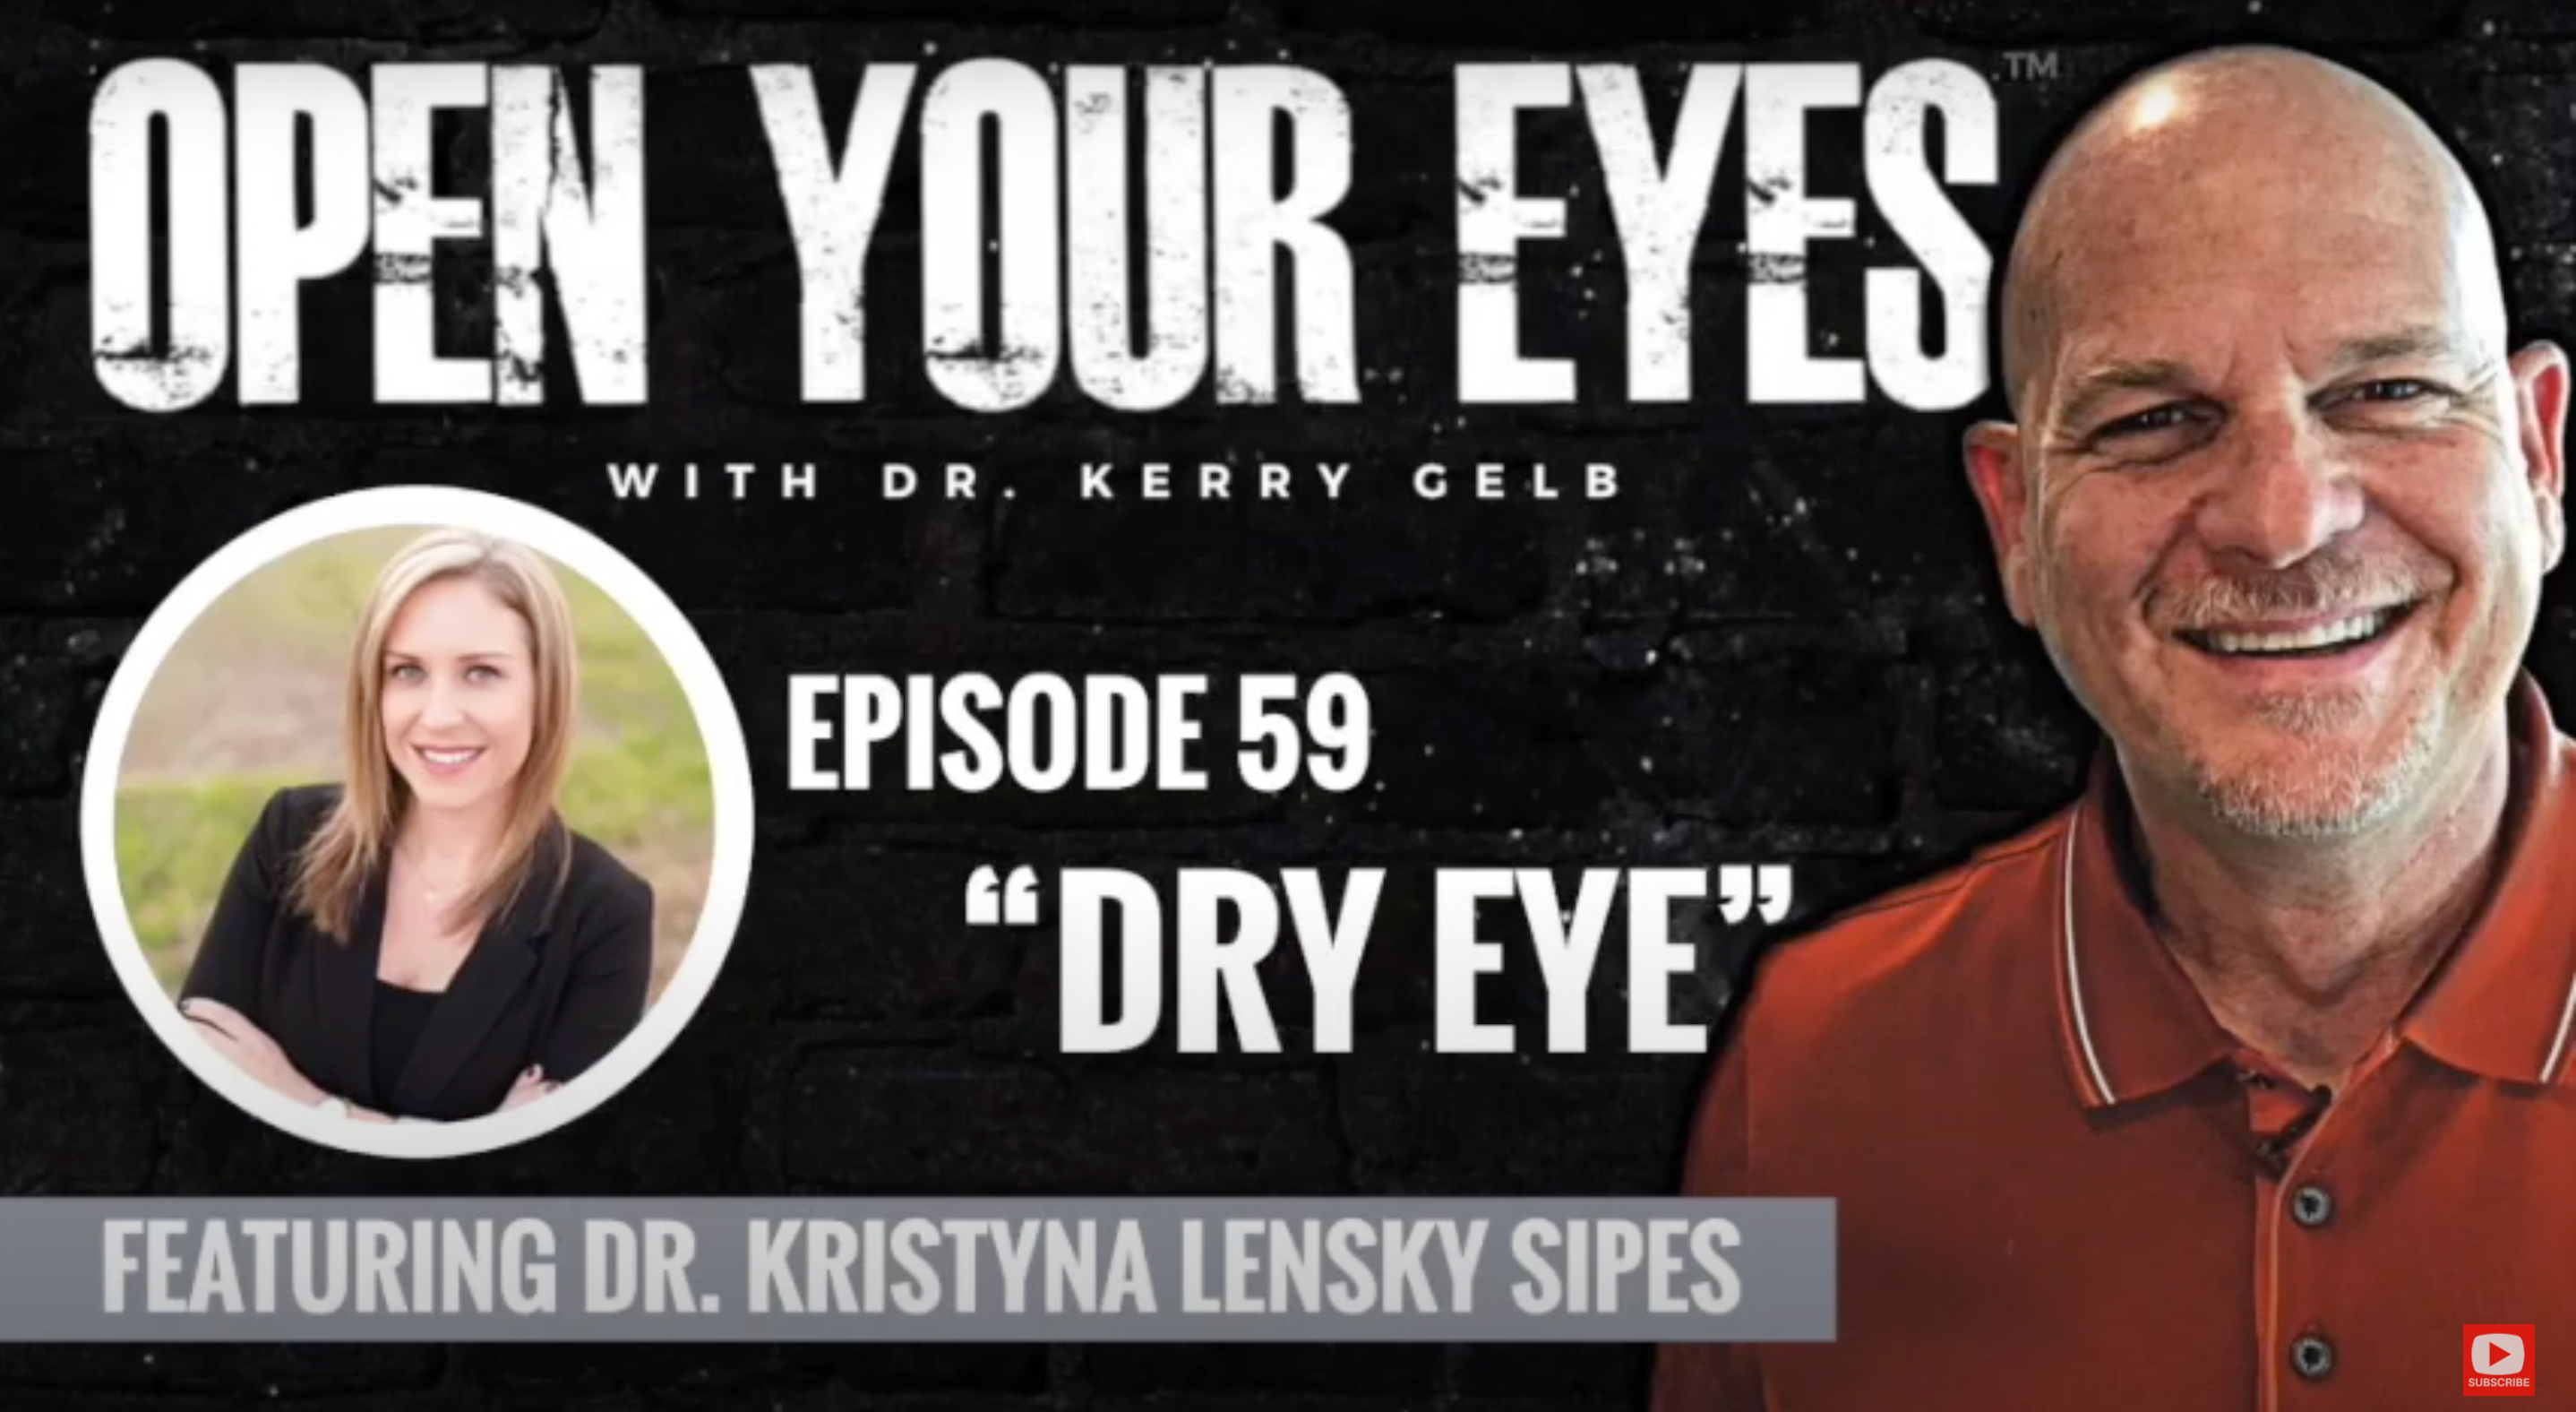 Podcast: The full spectrum of eye examinations and LASIK care with Kristyna Lensky Sipes, OD